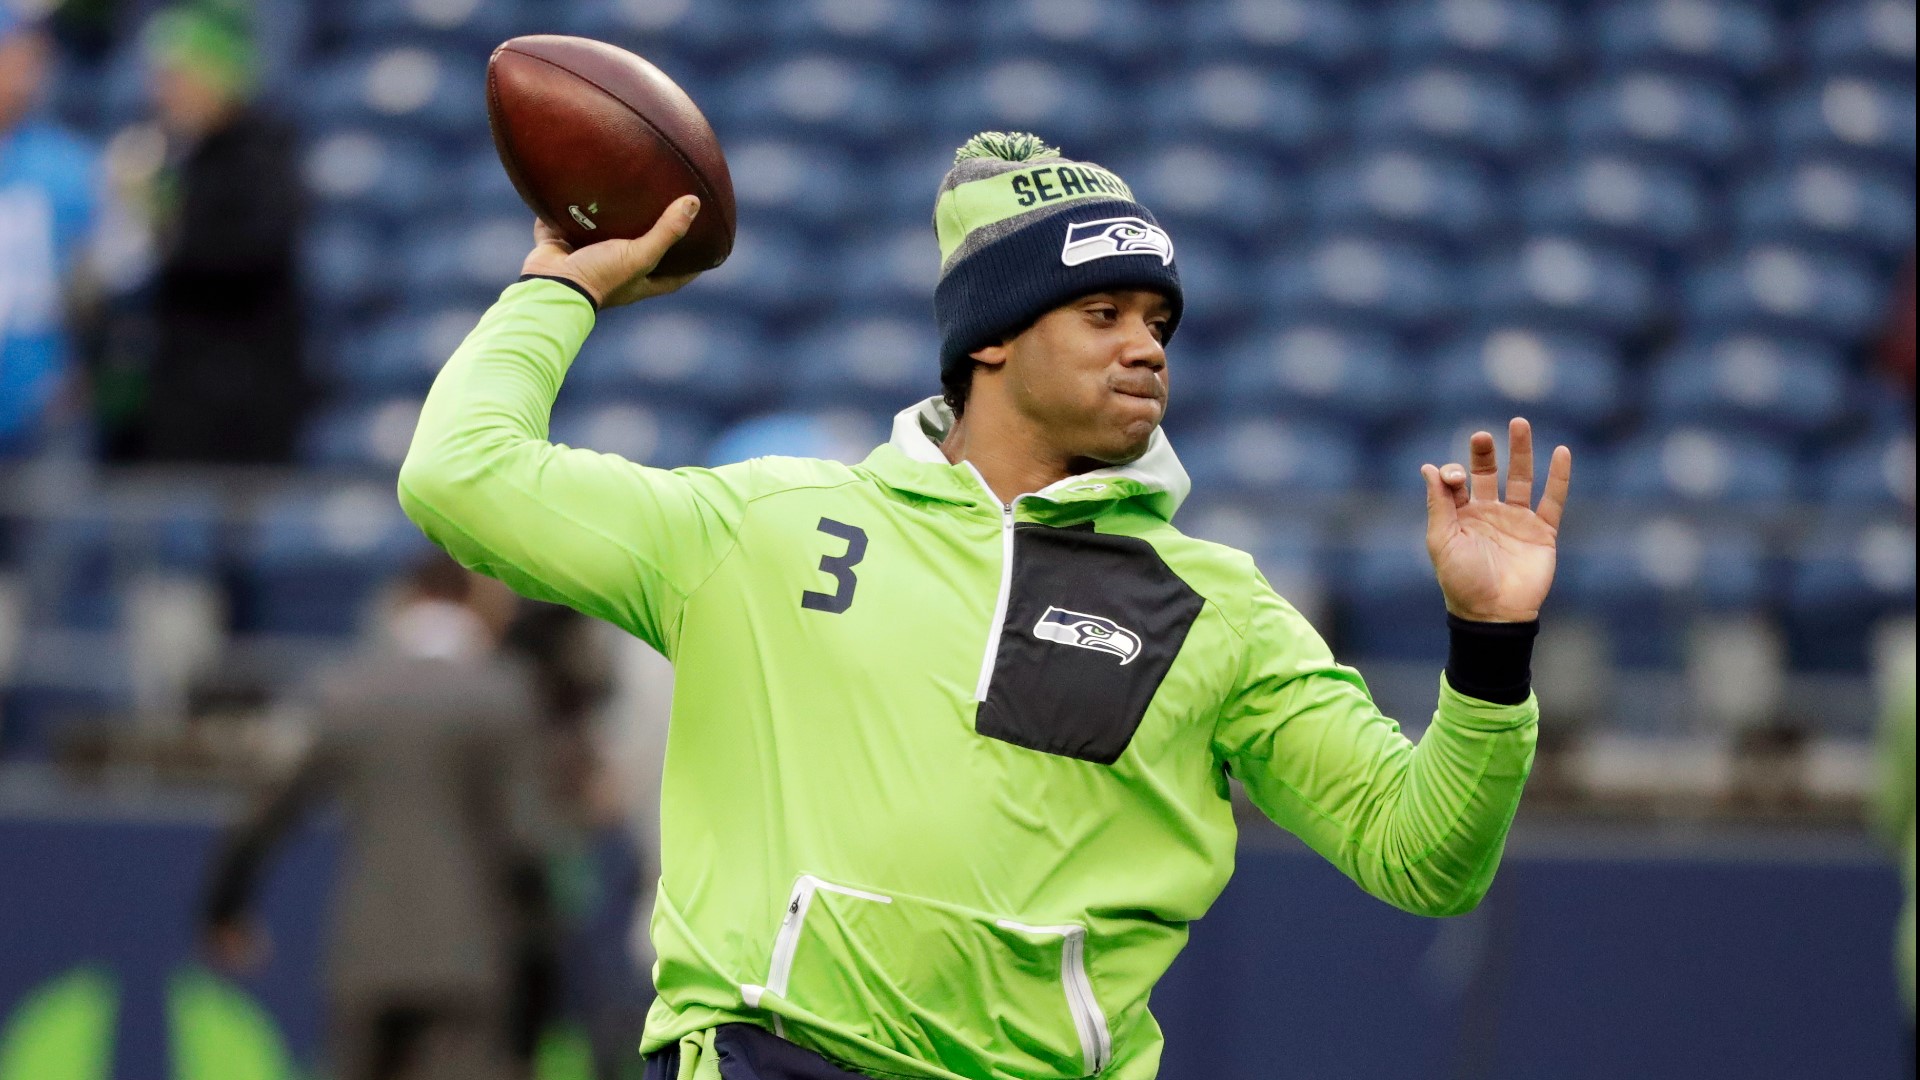 The Seattle Seahawks have traded starting quarterback Russell Wilson for players and several draft picks in a blockbuster trade